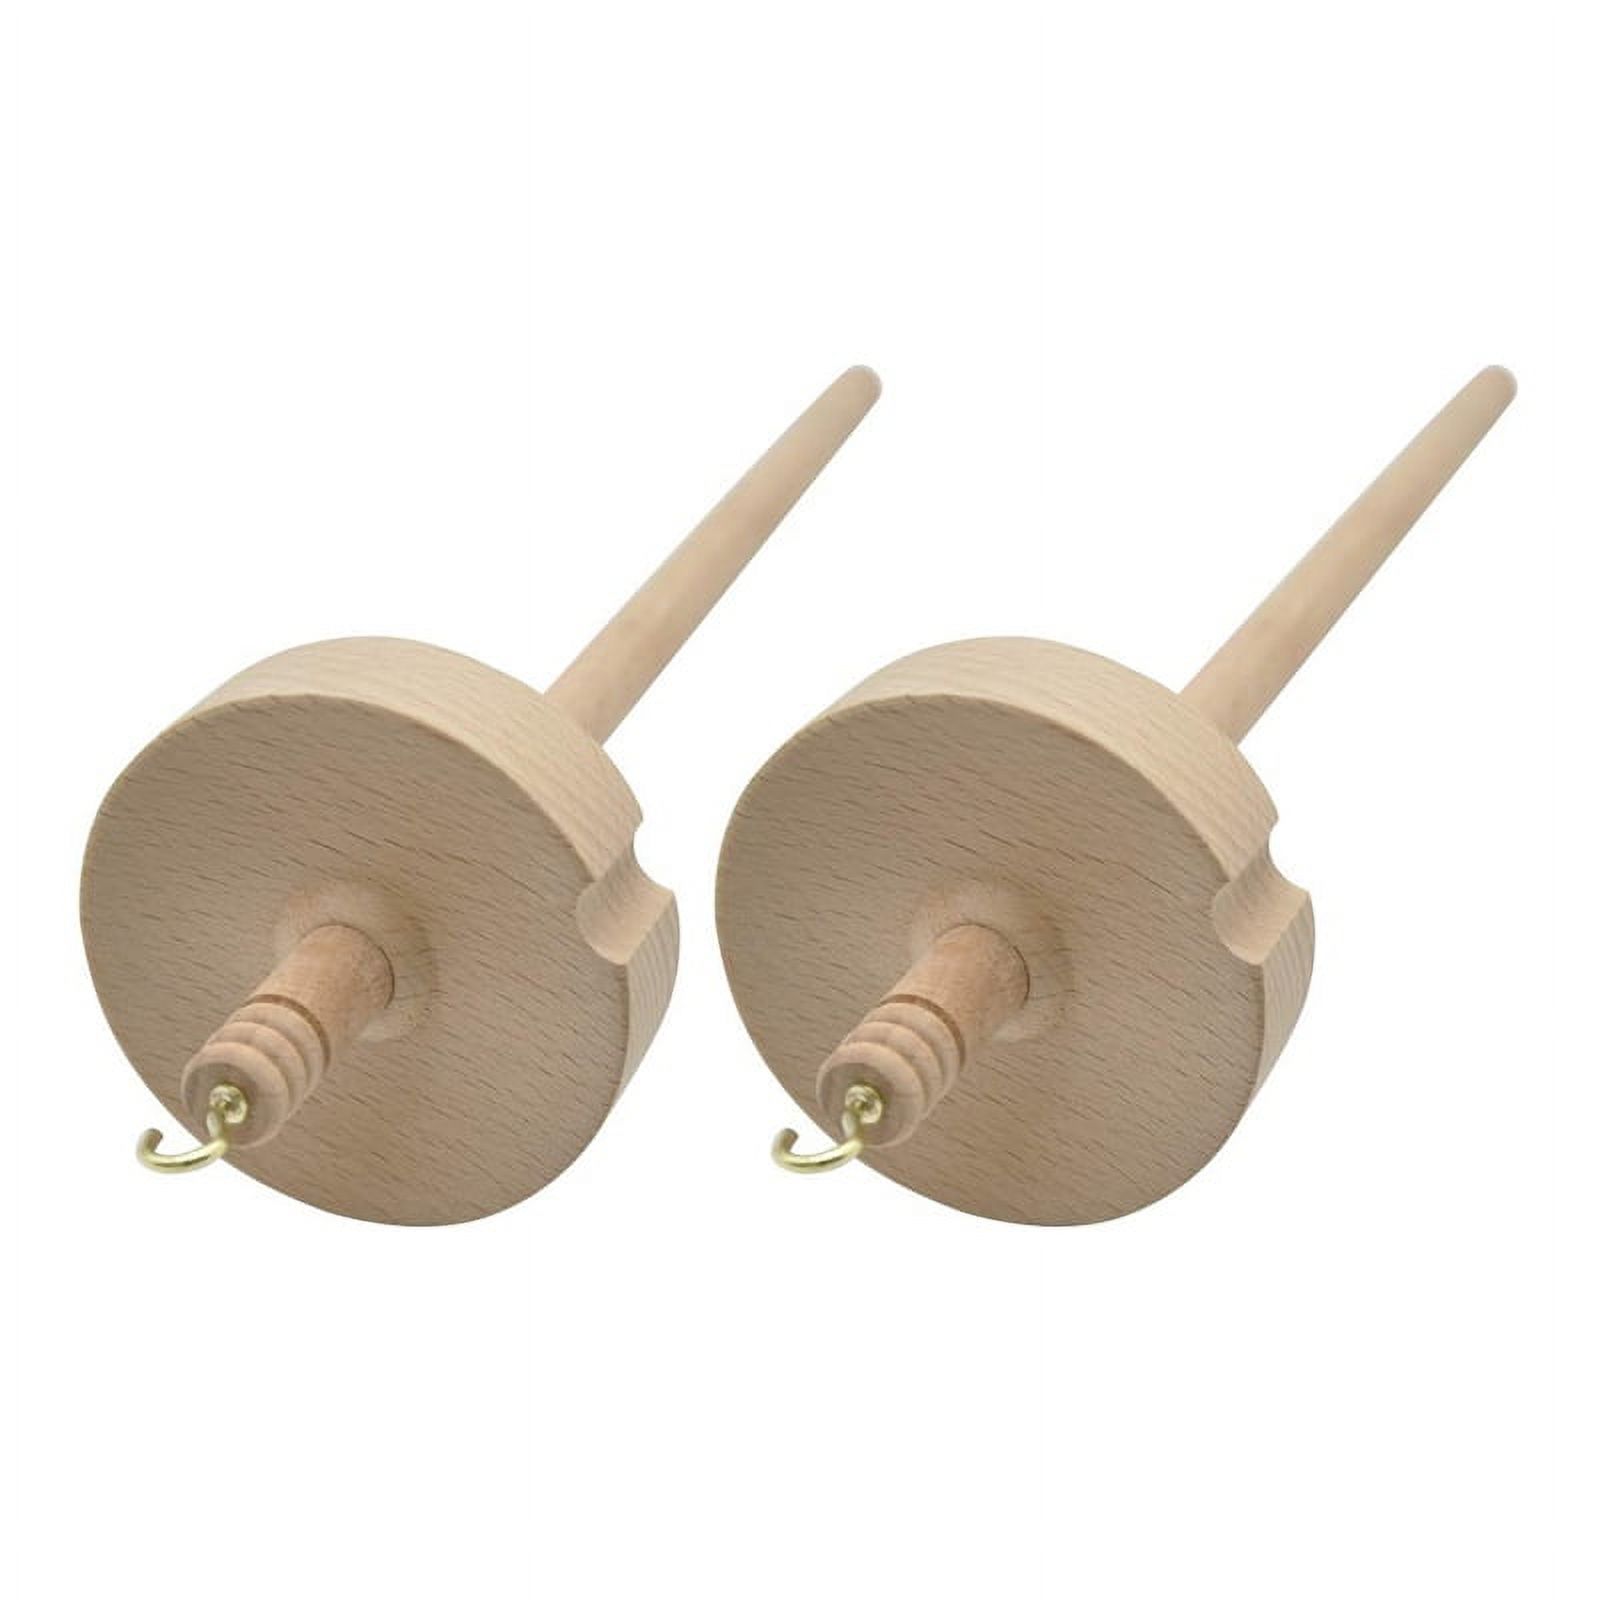 ckepdyeh 2Pcs Drop Spindle for Spinning Wool Yarn Spin Top Whorl